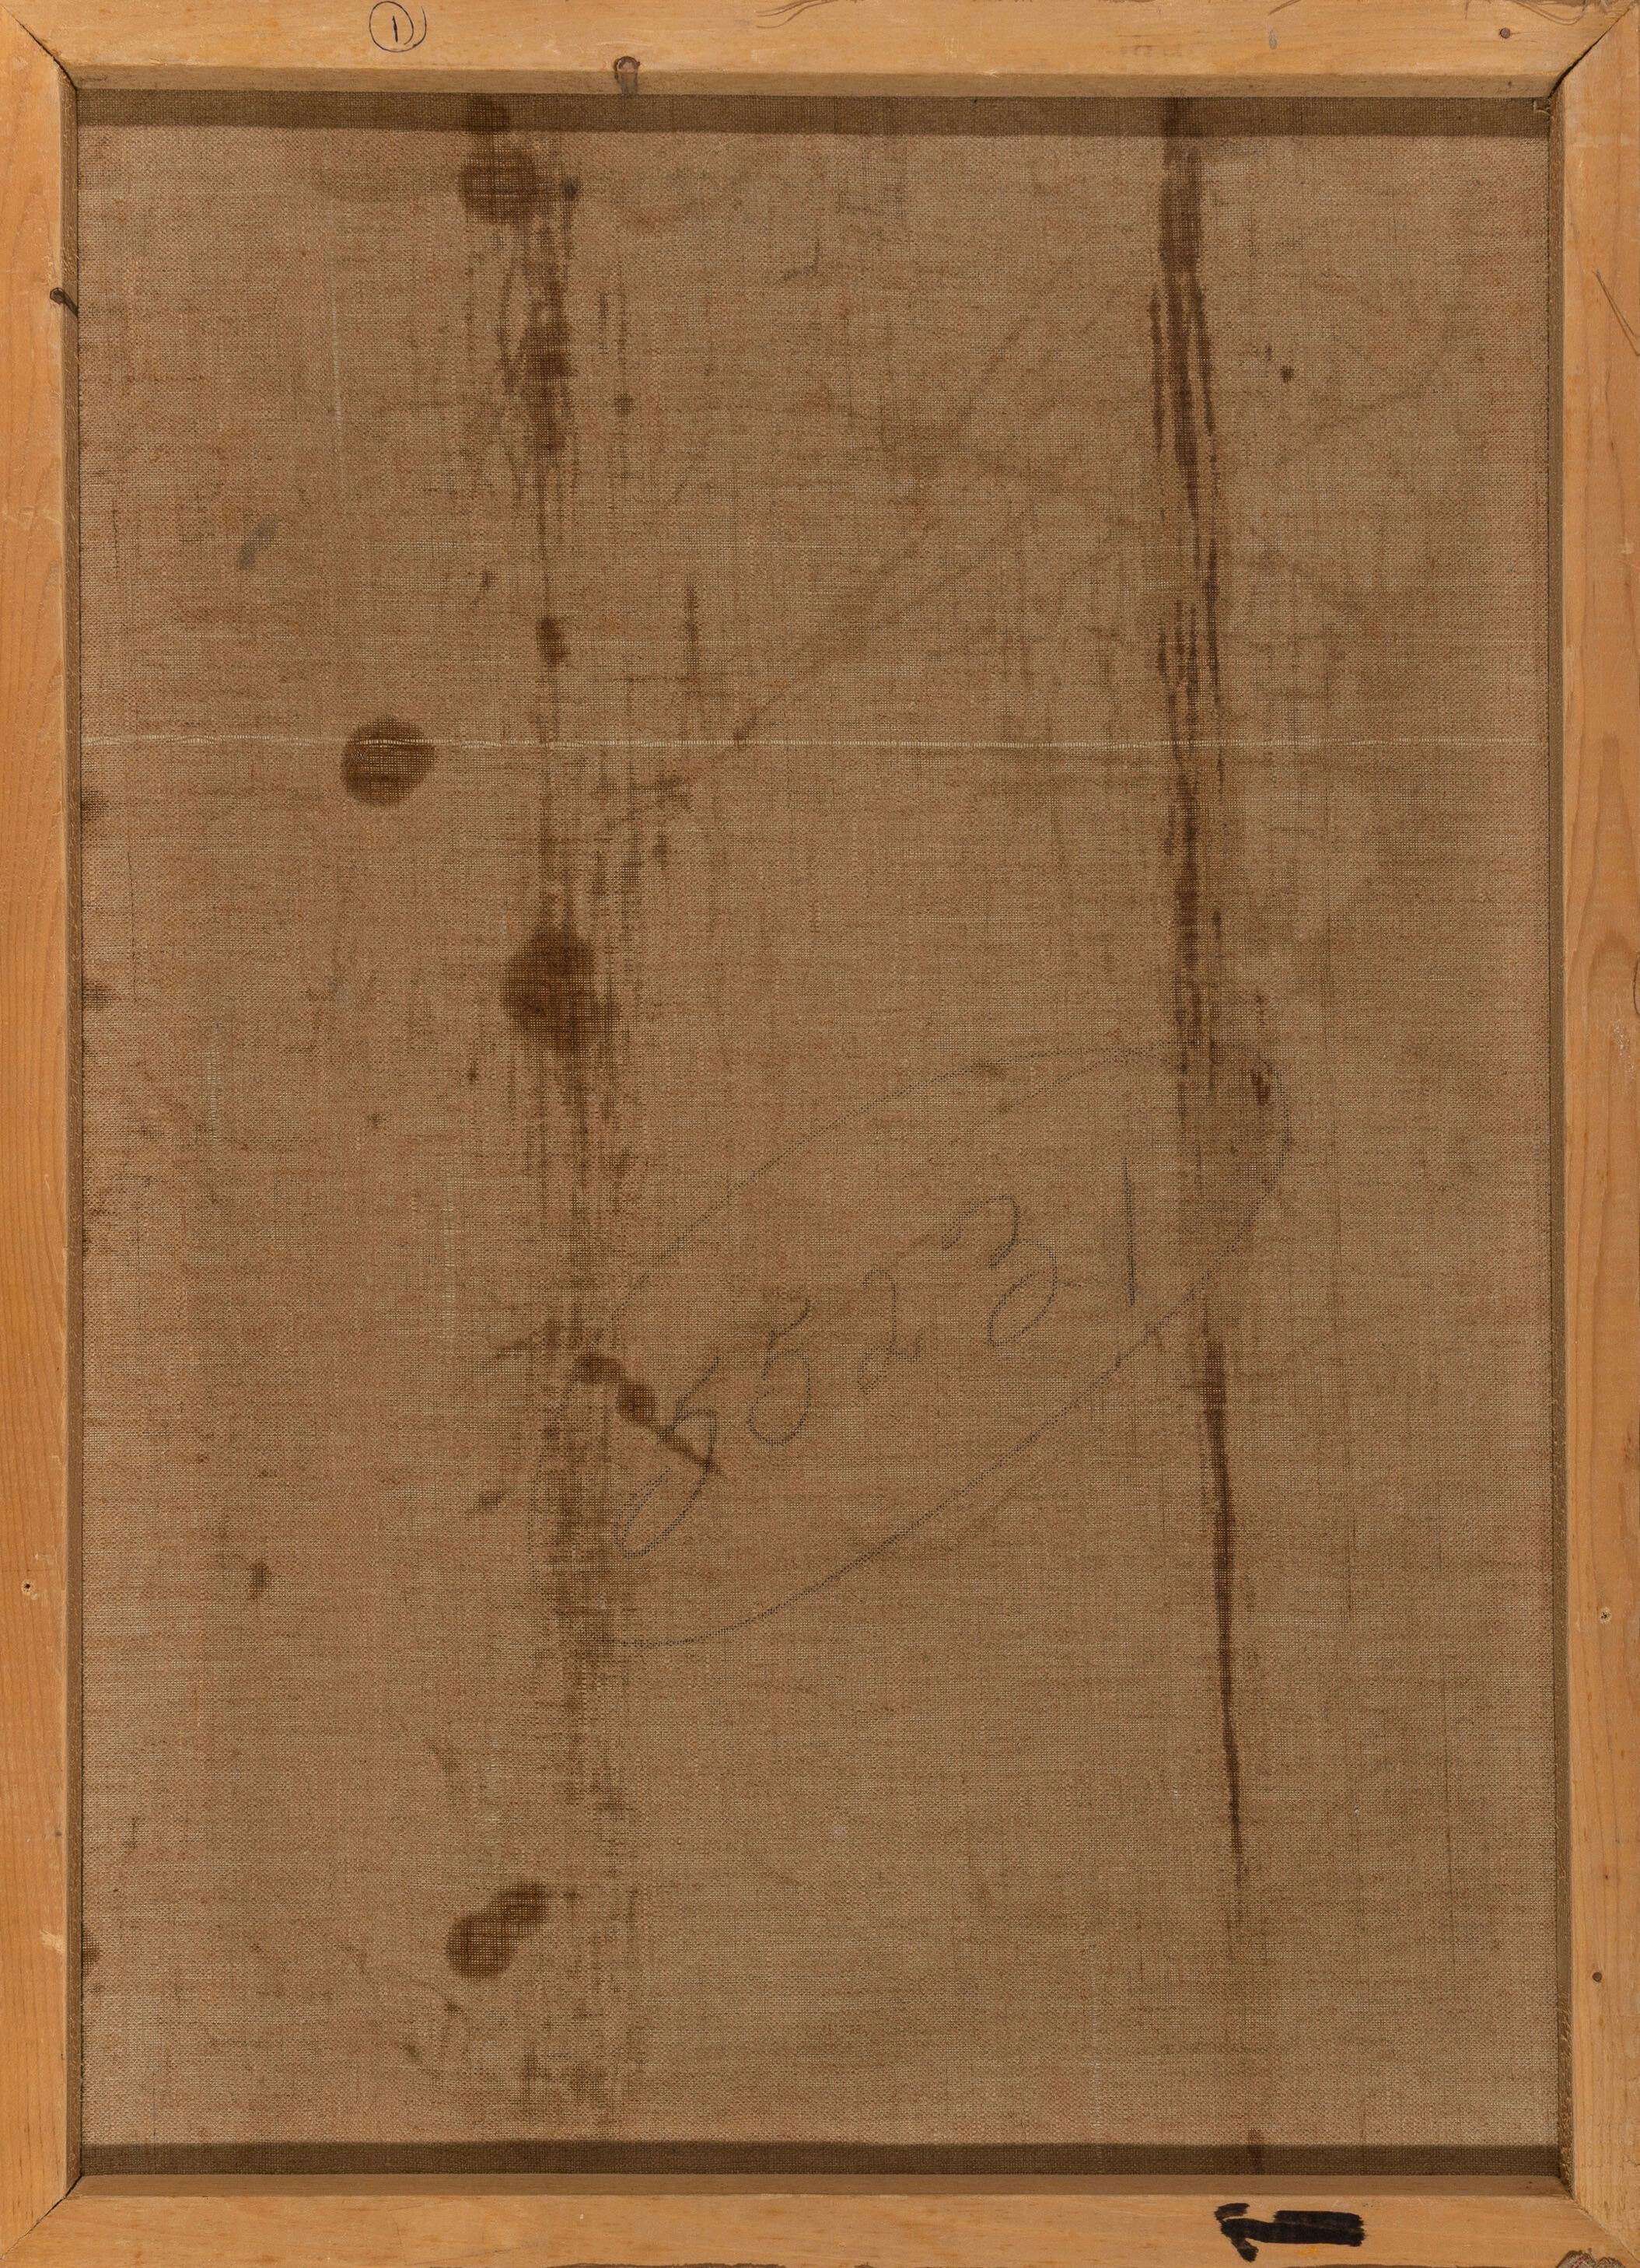 Signed Lower Left by Artist